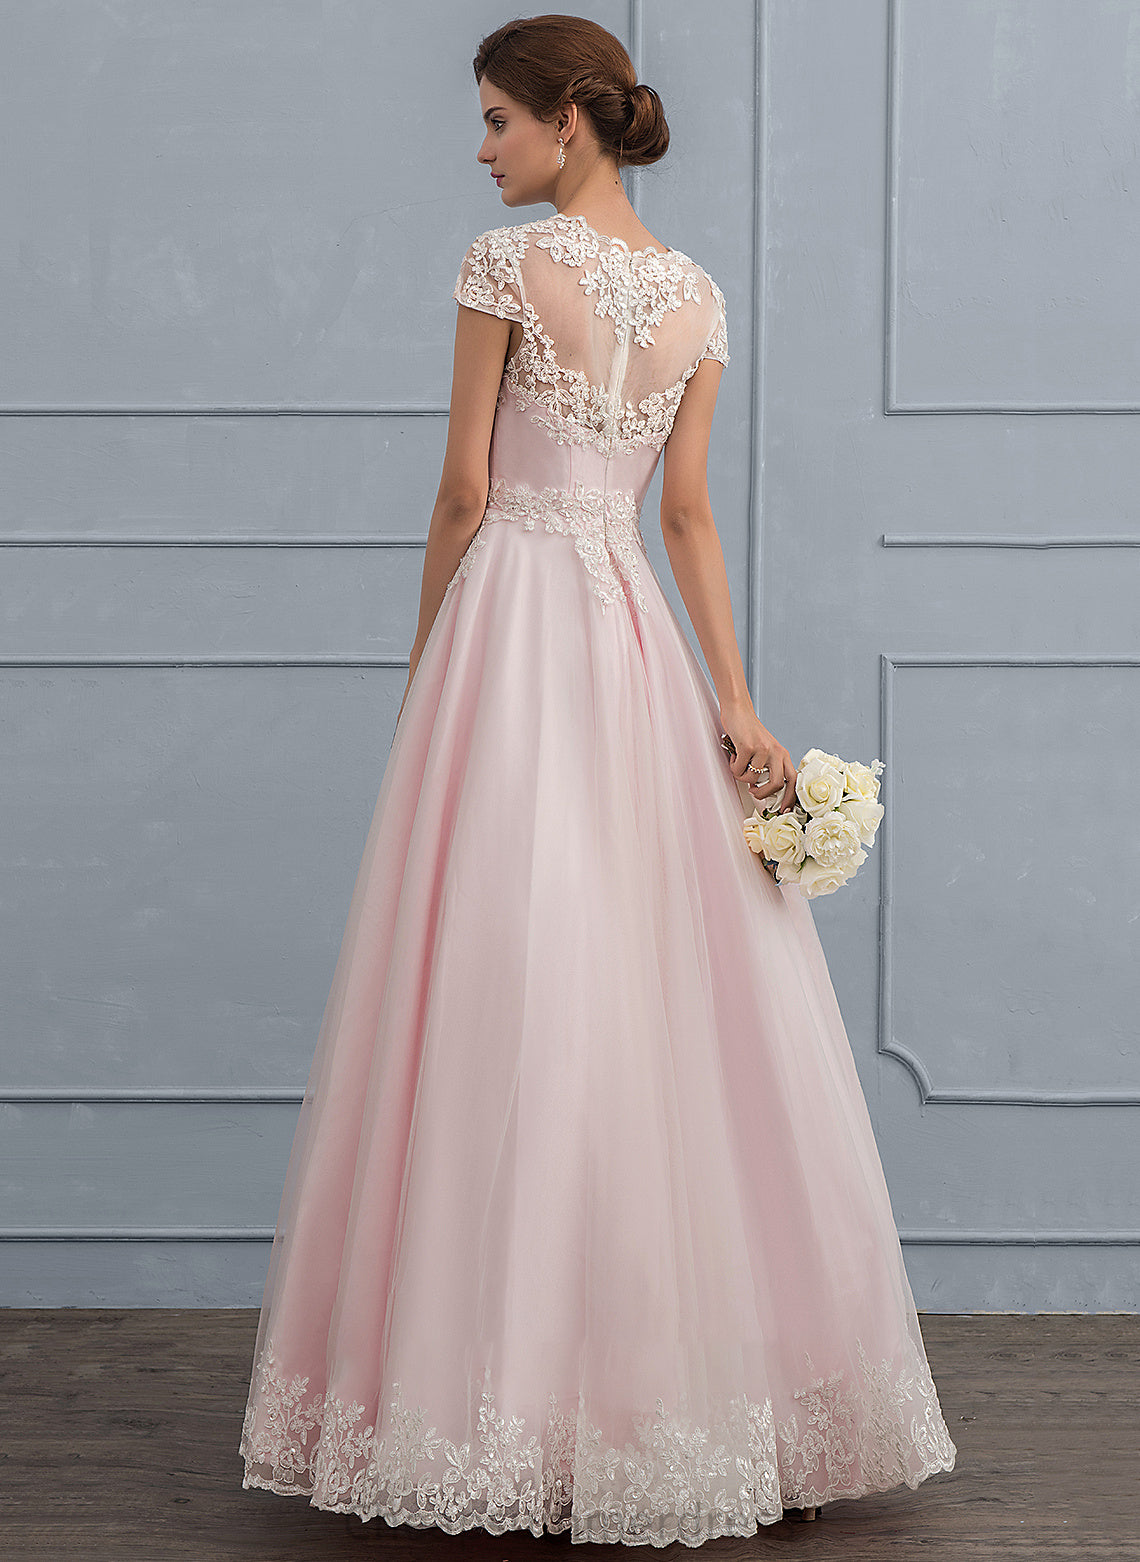 Dress Raven Sequins Wedding Tulle Wedding Dresses Floor-Length Beading With V-neck Ball-Gown/Princess